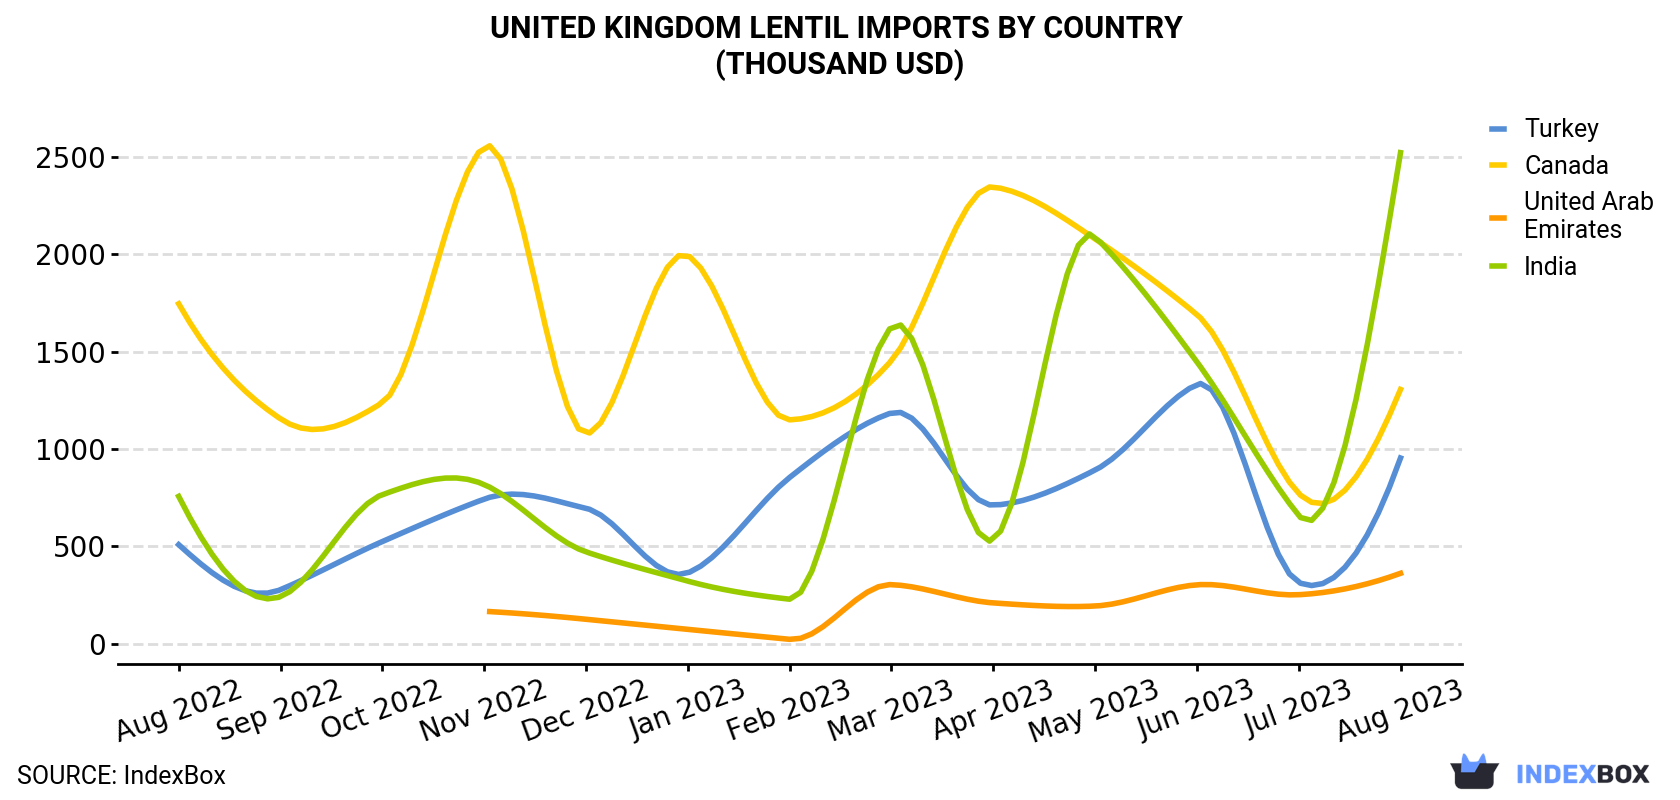 United Kingdom Lentil Imports By Country (Thousand USD)